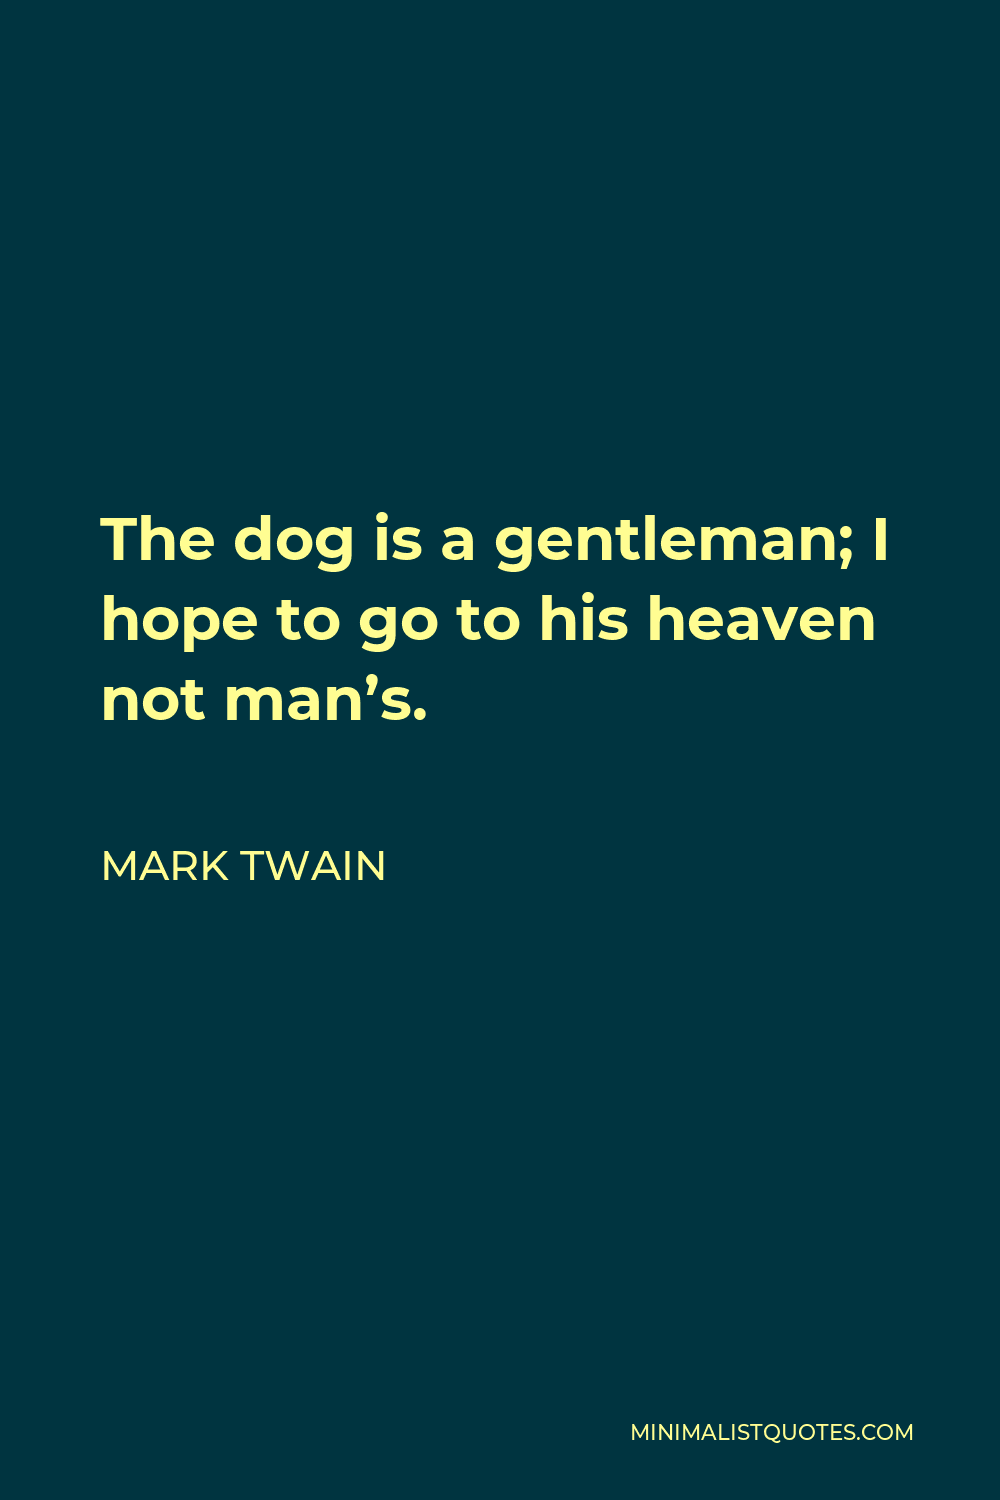 Mark Twain Quote - The dog is a gentleman; I hope to go to his heaven not man’s.